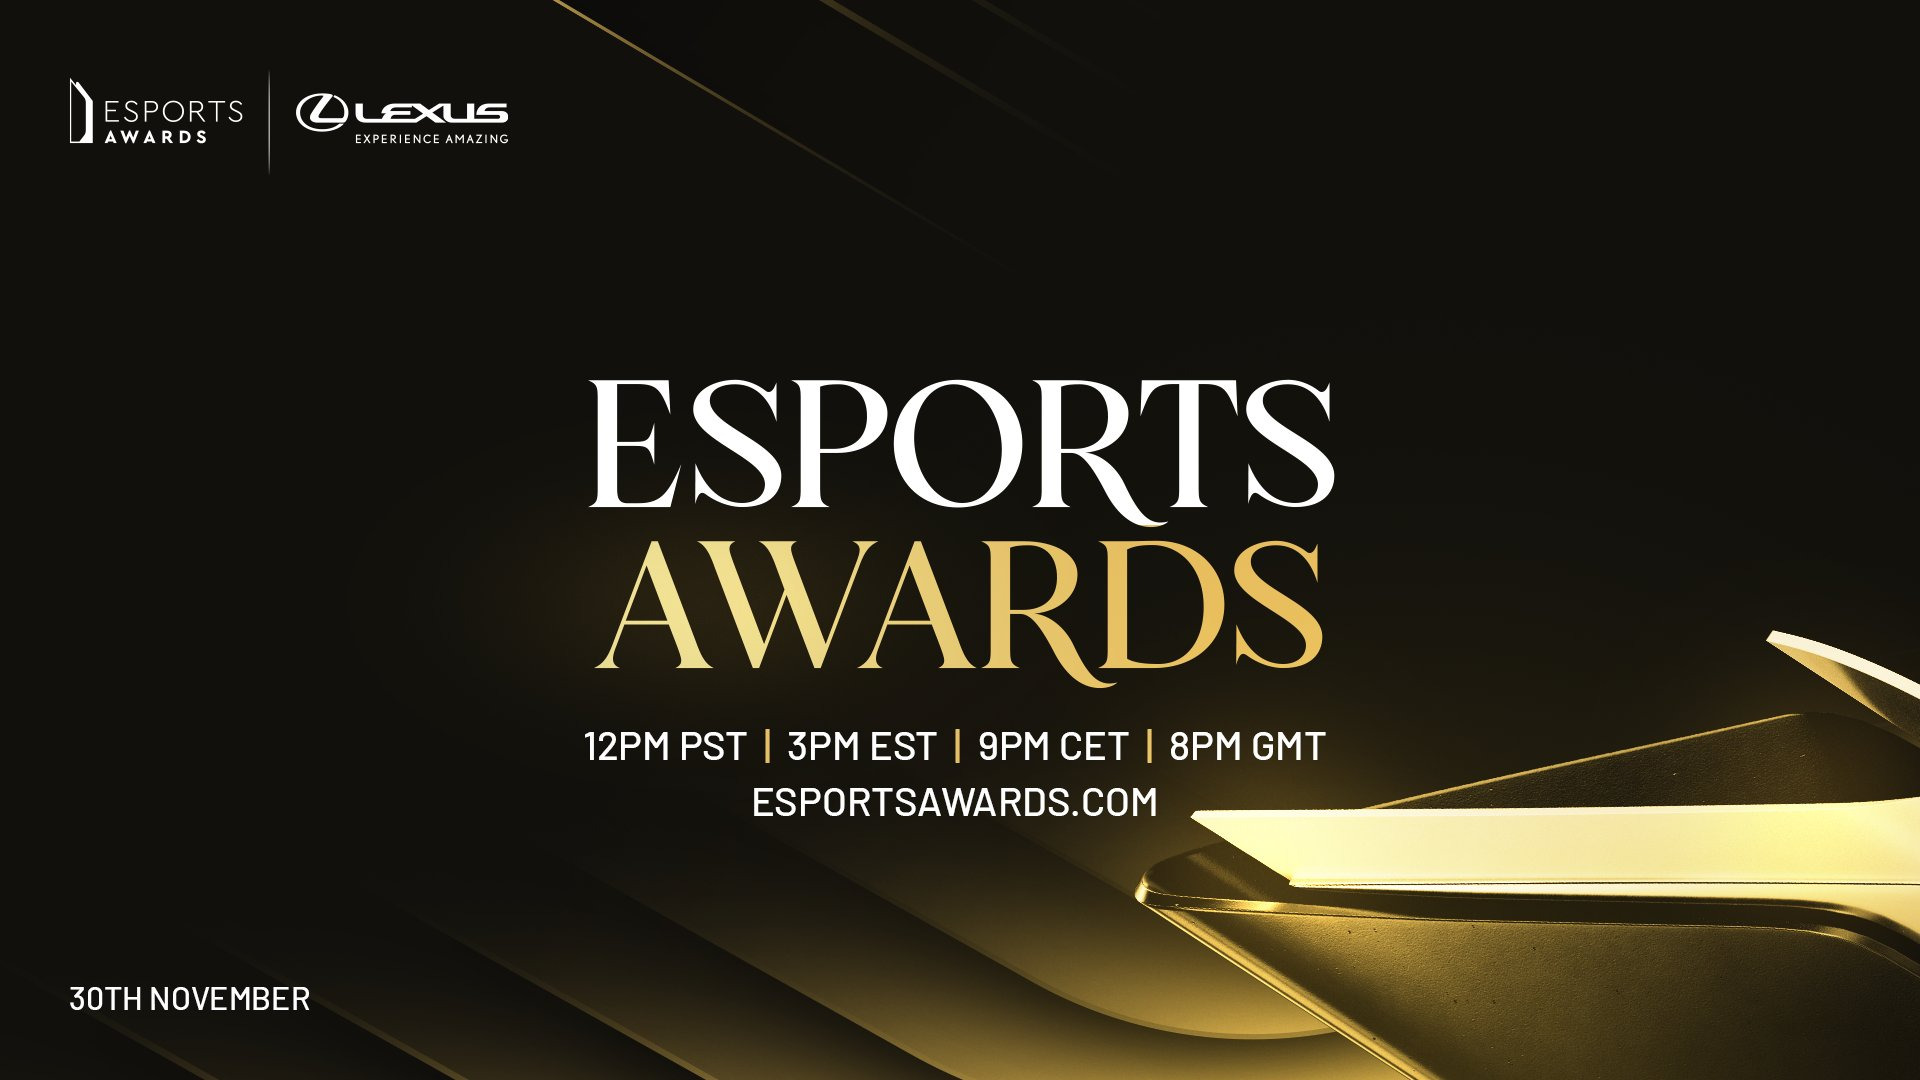 Here are your 2022 Esports Awards winners [All results updated